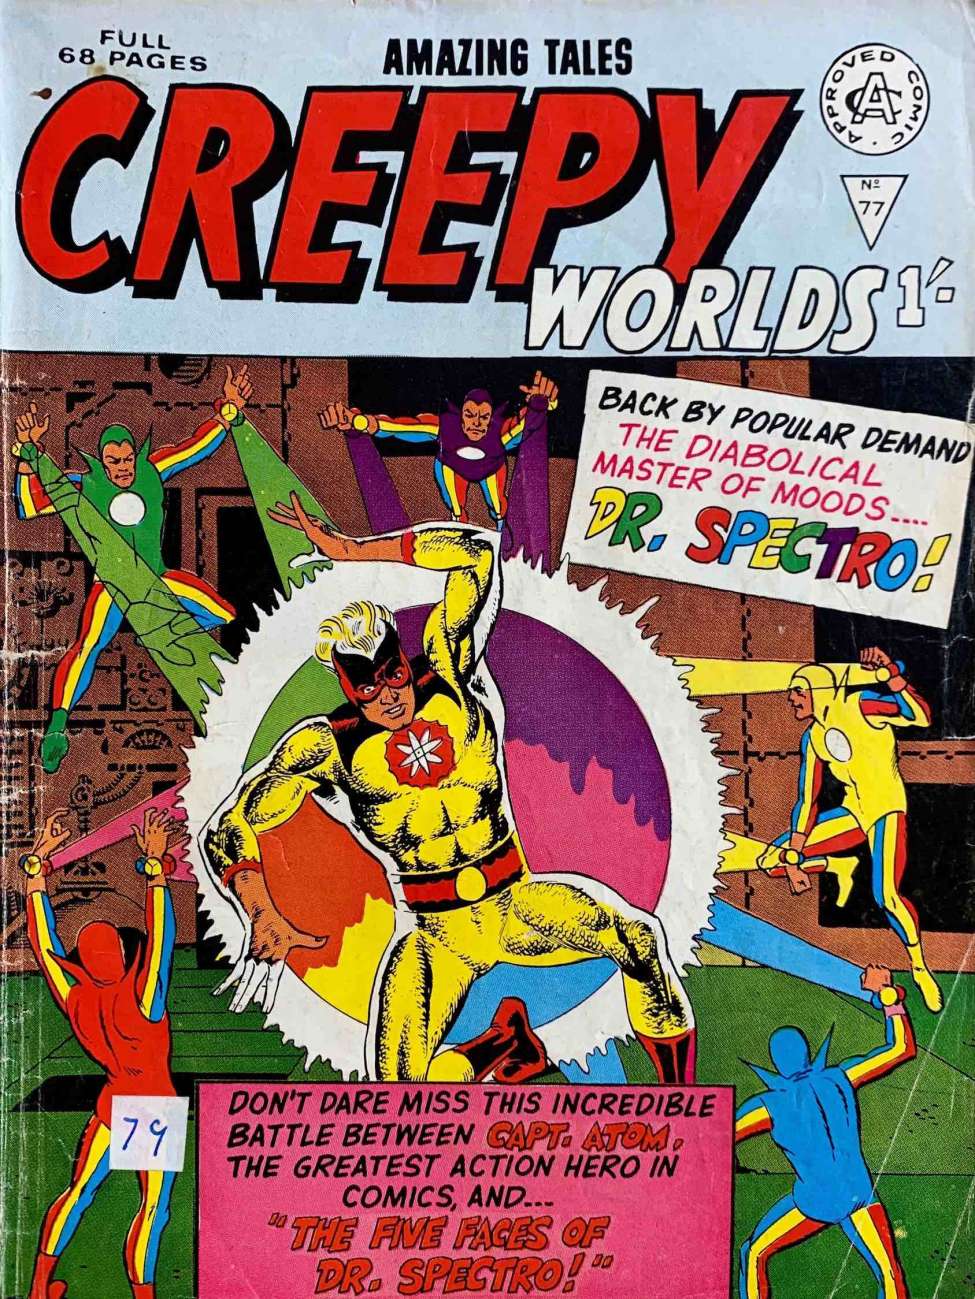 Book Cover For Creepy Worlds 77